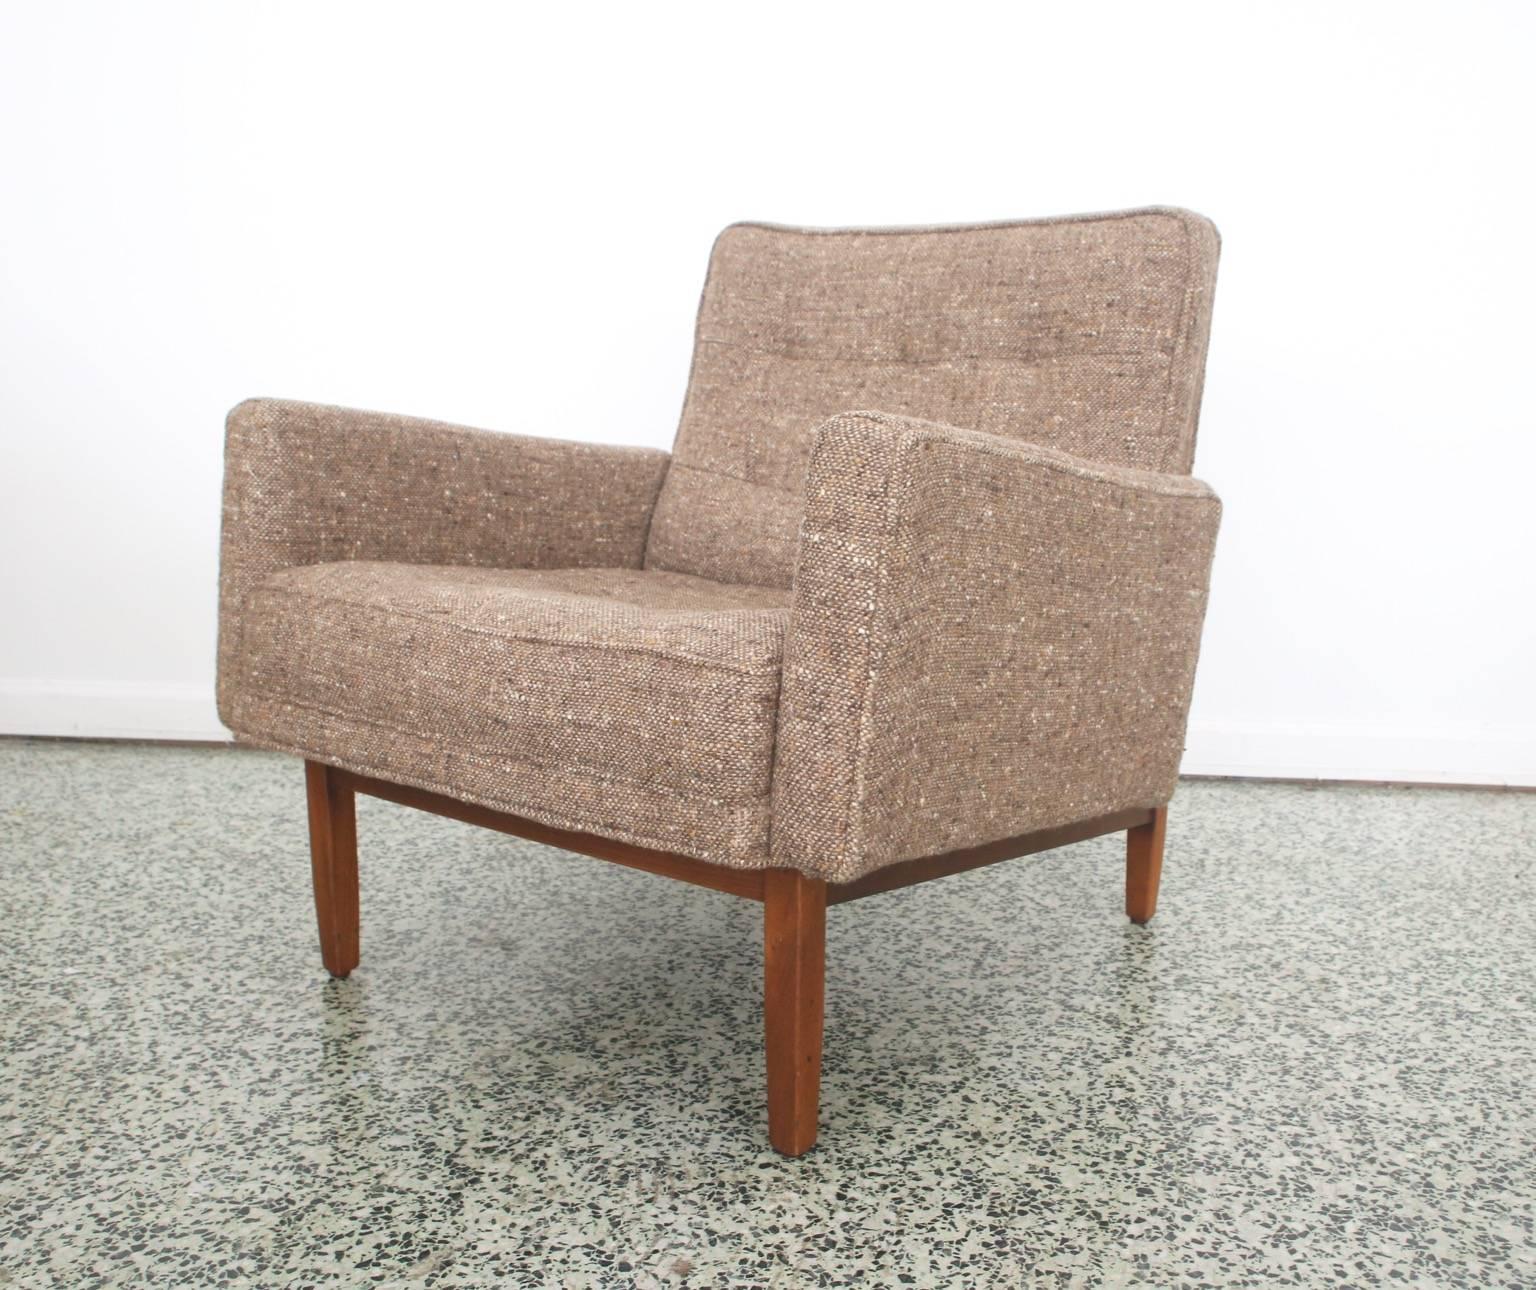 Early Pair of Florence Knoll Lounge Chairs 1